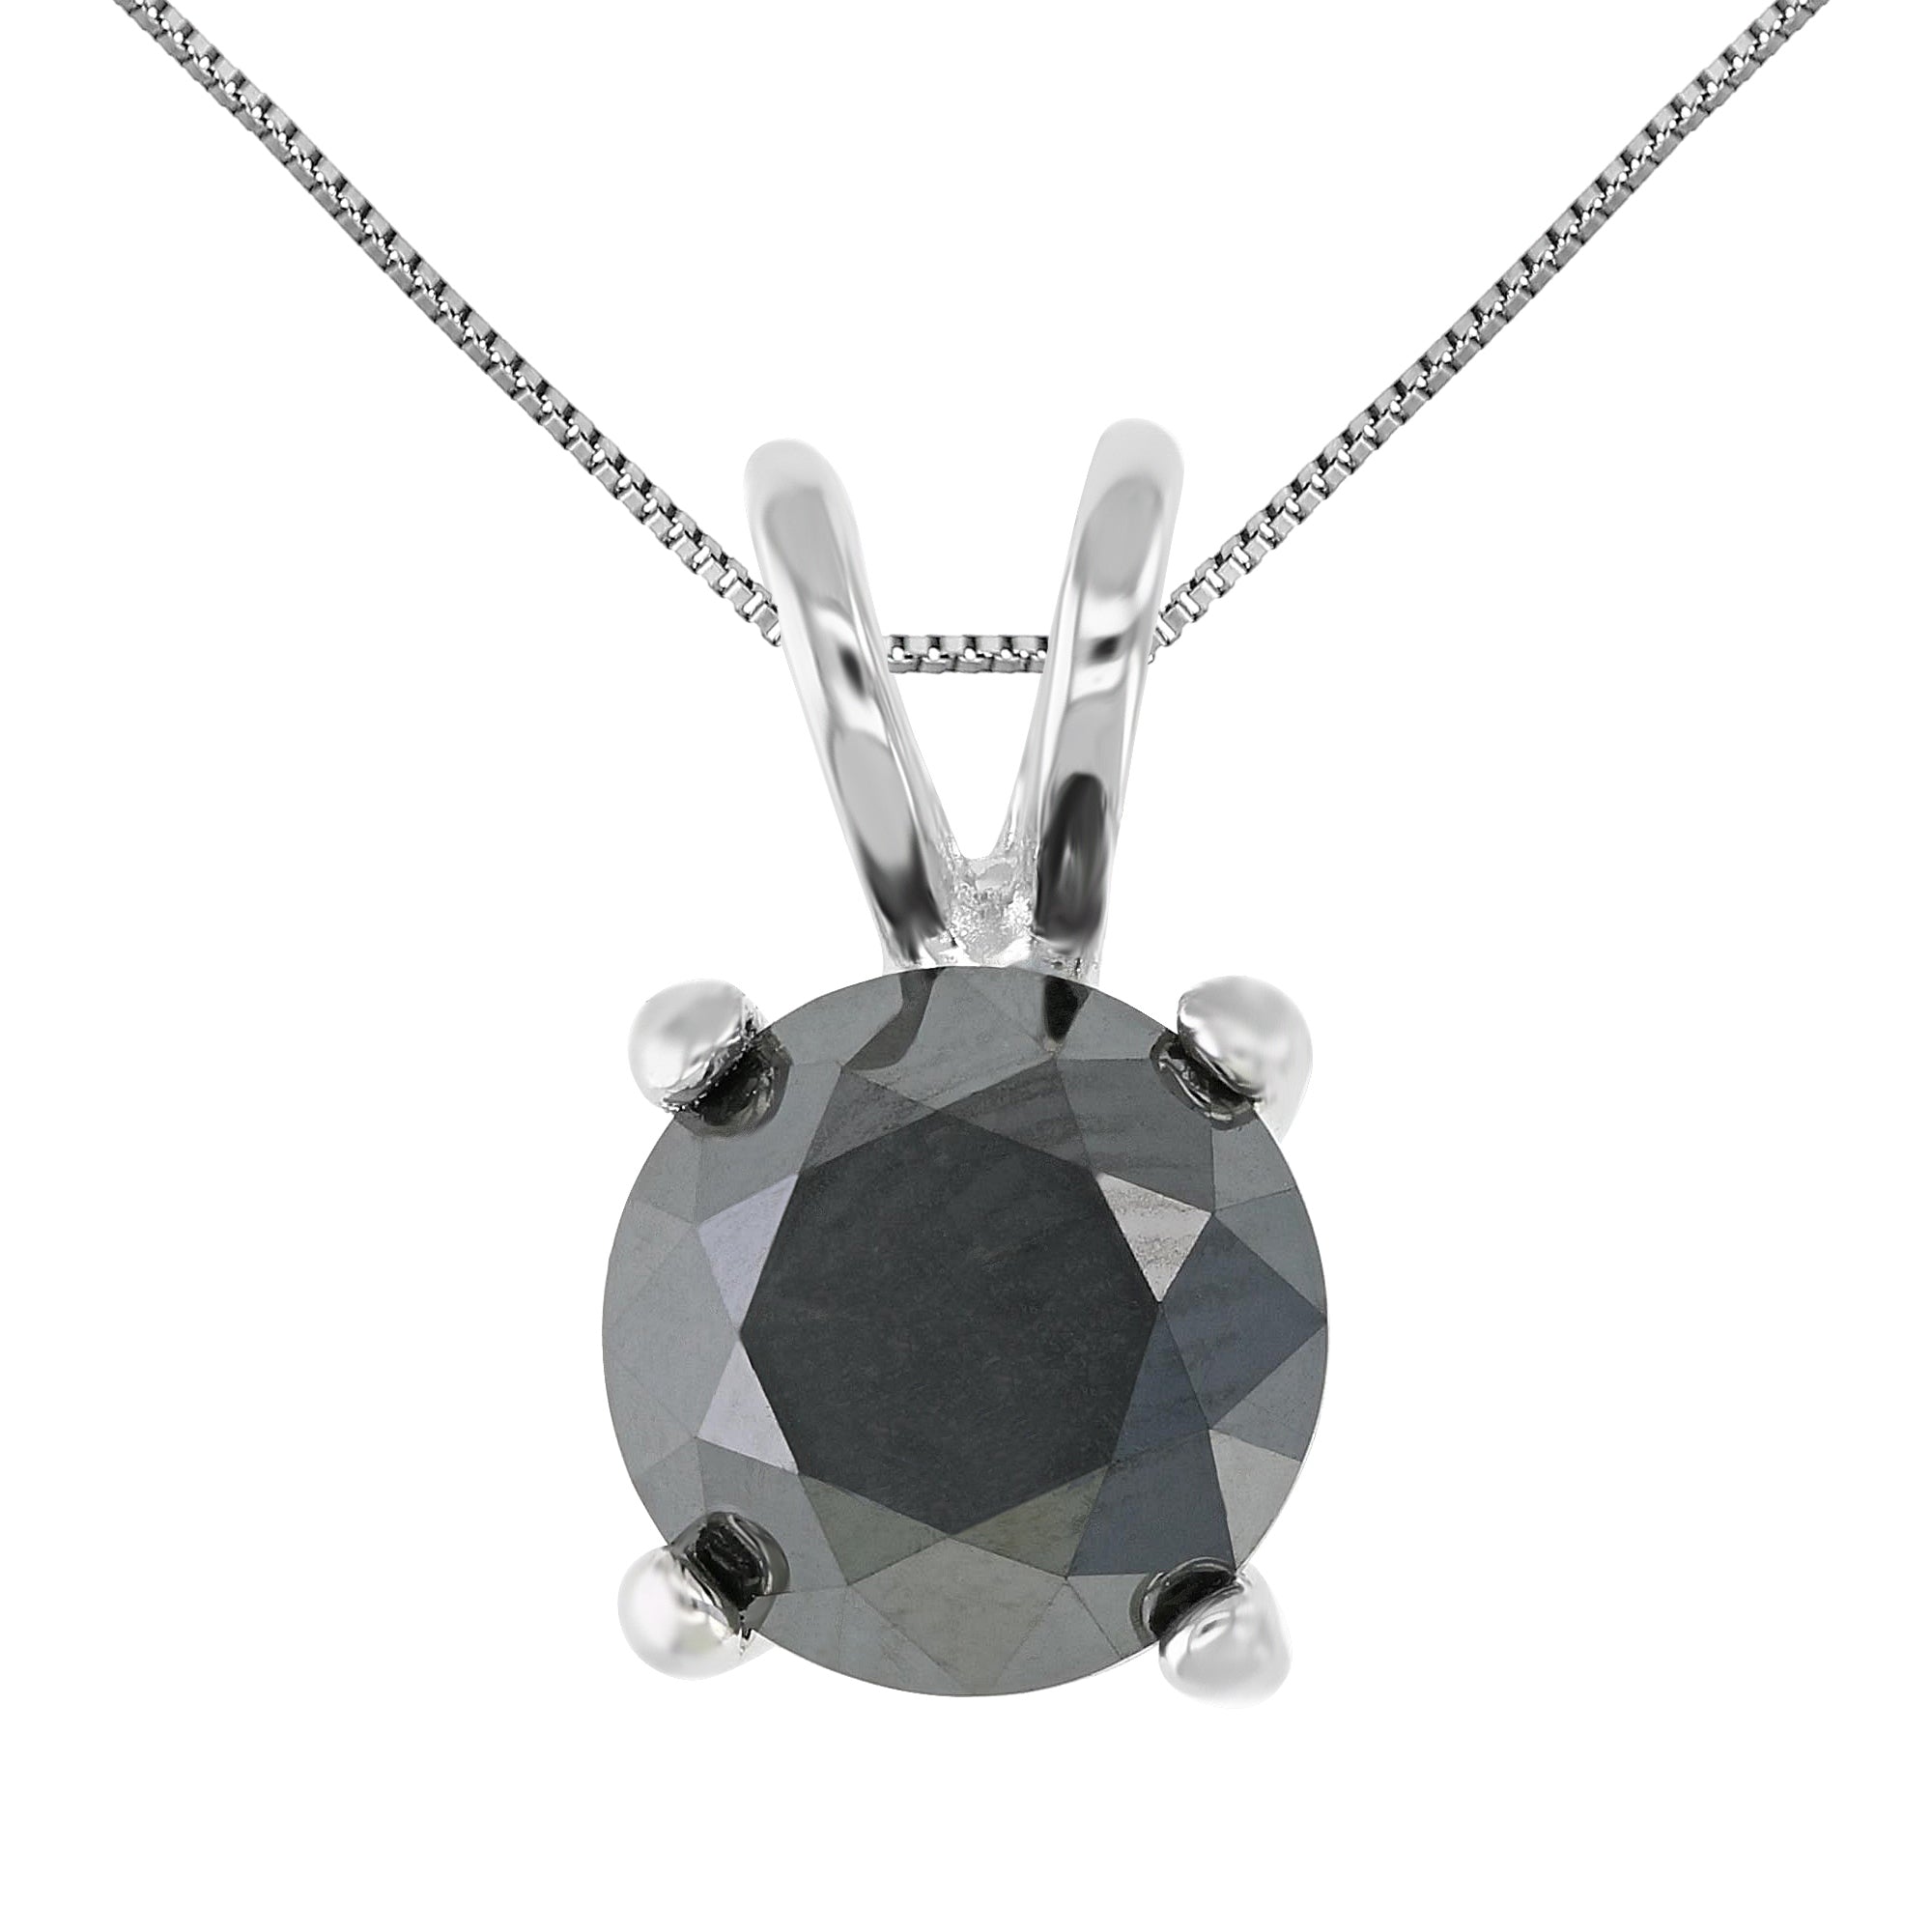 7 cttw Diamond Pendant, Black Diamond Solitaire Pendant Necklace for Women in .925 Sterling Silver with Rhodium, 18 Inch Chain, Prong Setting